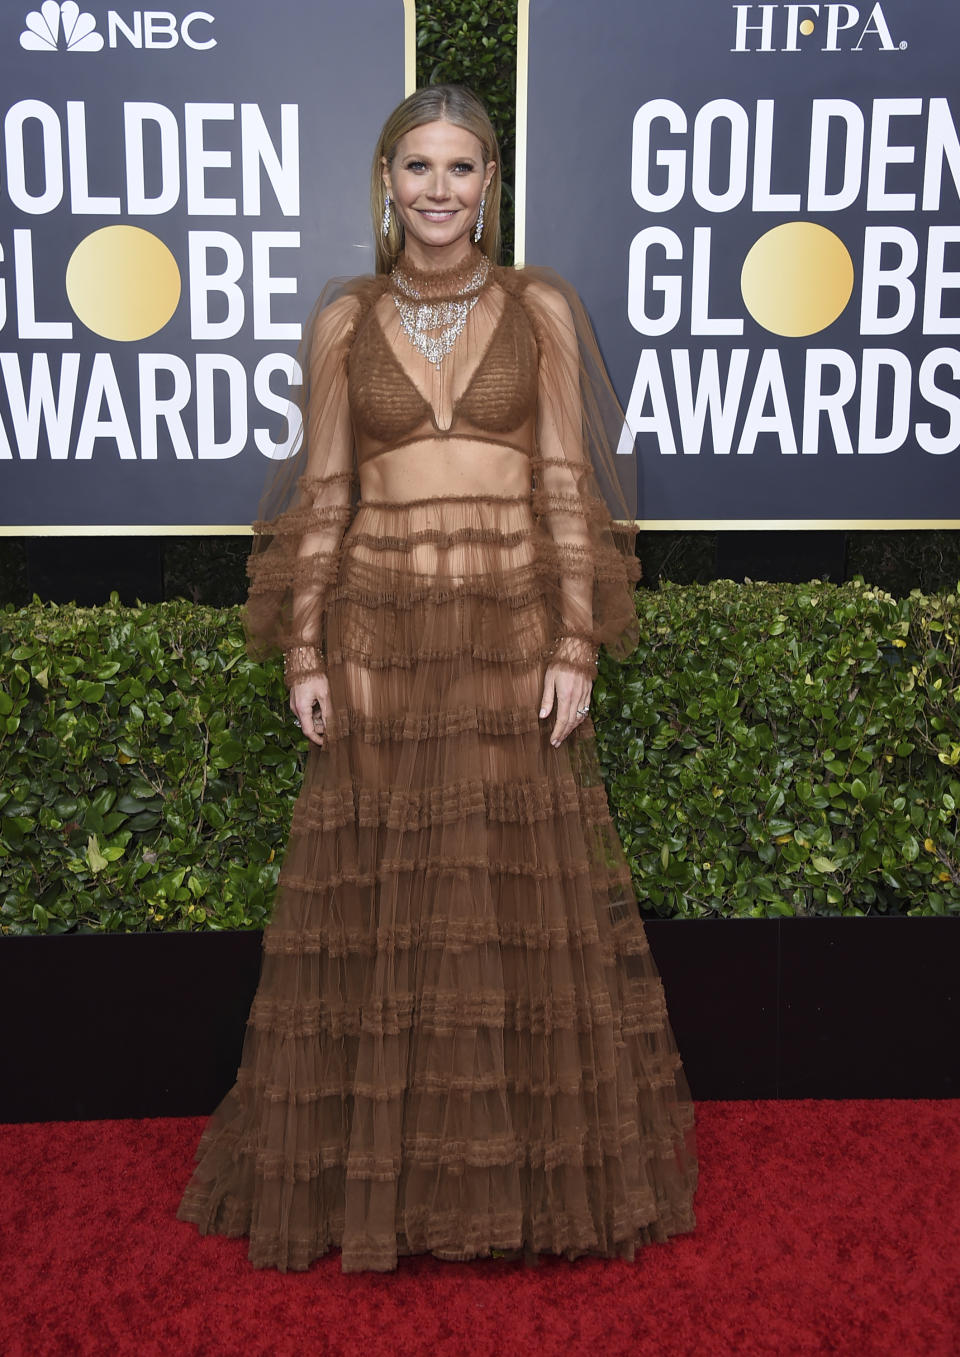 Gwyneth Paltrow arrives at the 77th annual Golden Globe Awards at the Beverly Hilton Hotel on Sunday, Jan. 5, 2020, in Beverly Hills, Calif. (Photo by Jordan Strauss/Invision/AP)